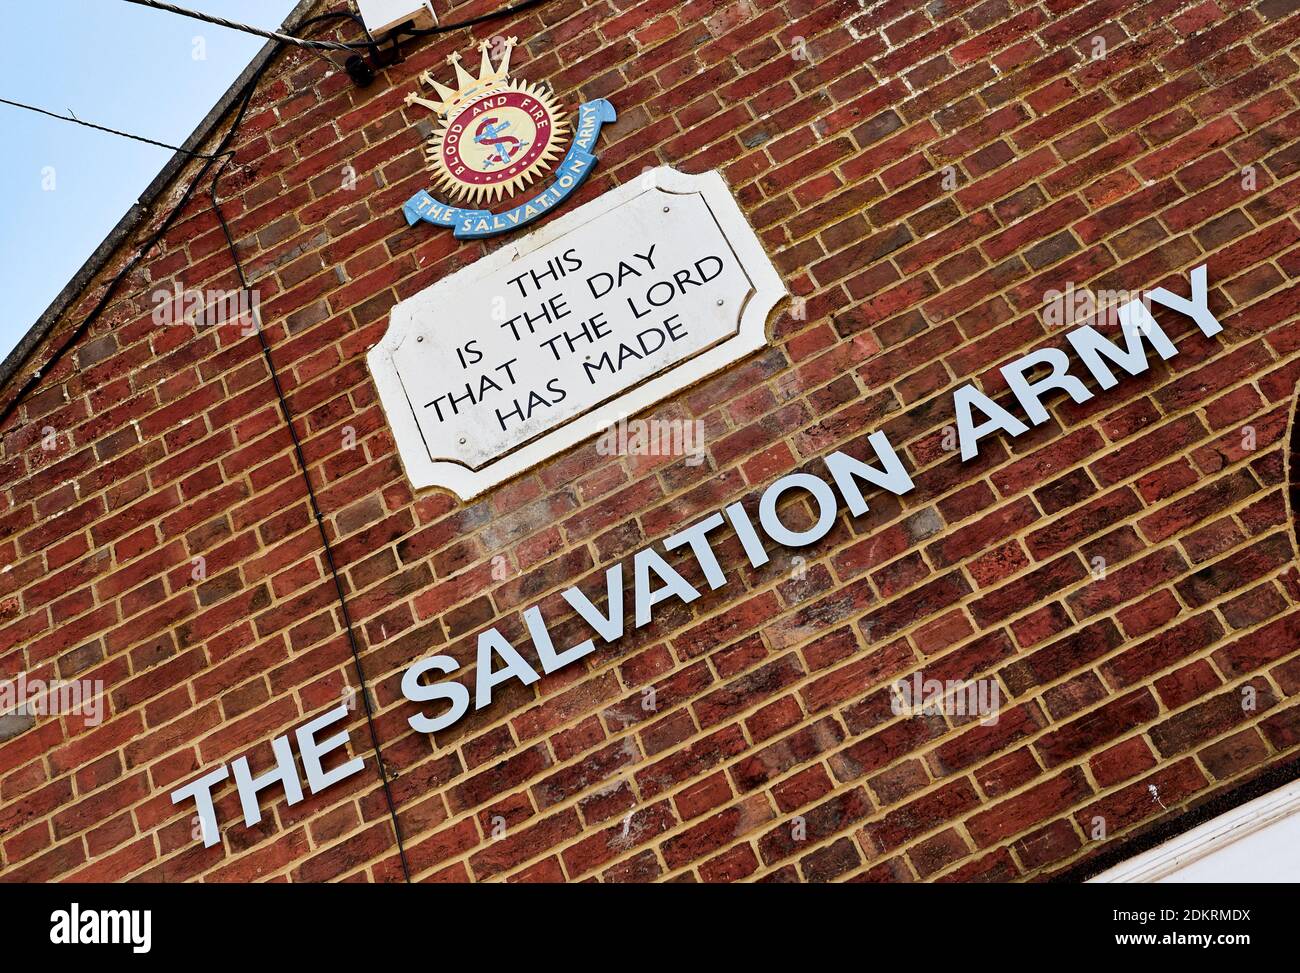 The Salvation Army Sign on a Building, Founded in 1865 in East London, The salvation army helps the poor and homeless, Kent, England - 11 May 2020 Stock Photo